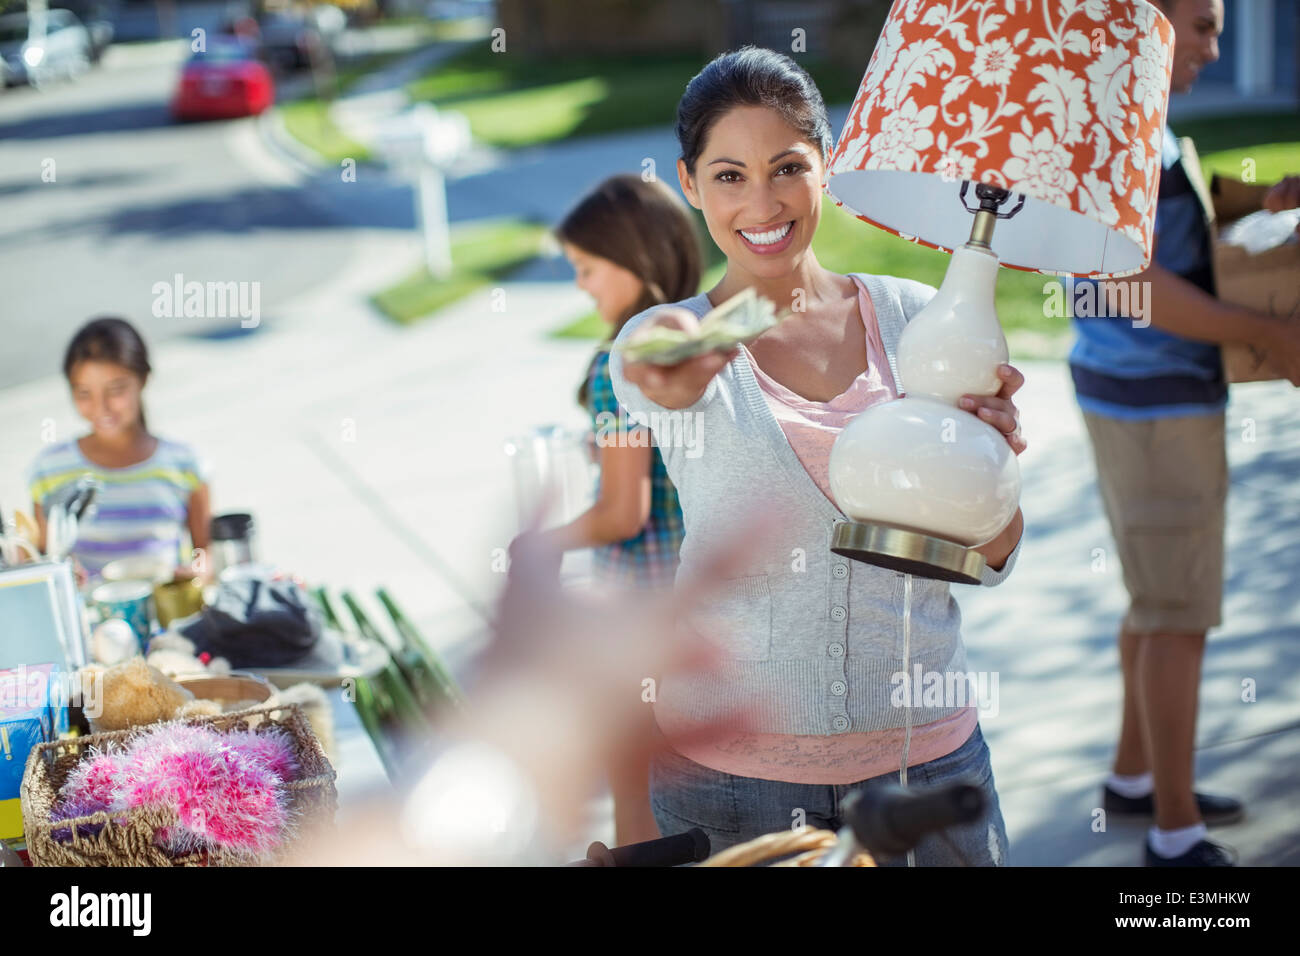 Portrait of woman paying for lamp at yard sale Stock Photo